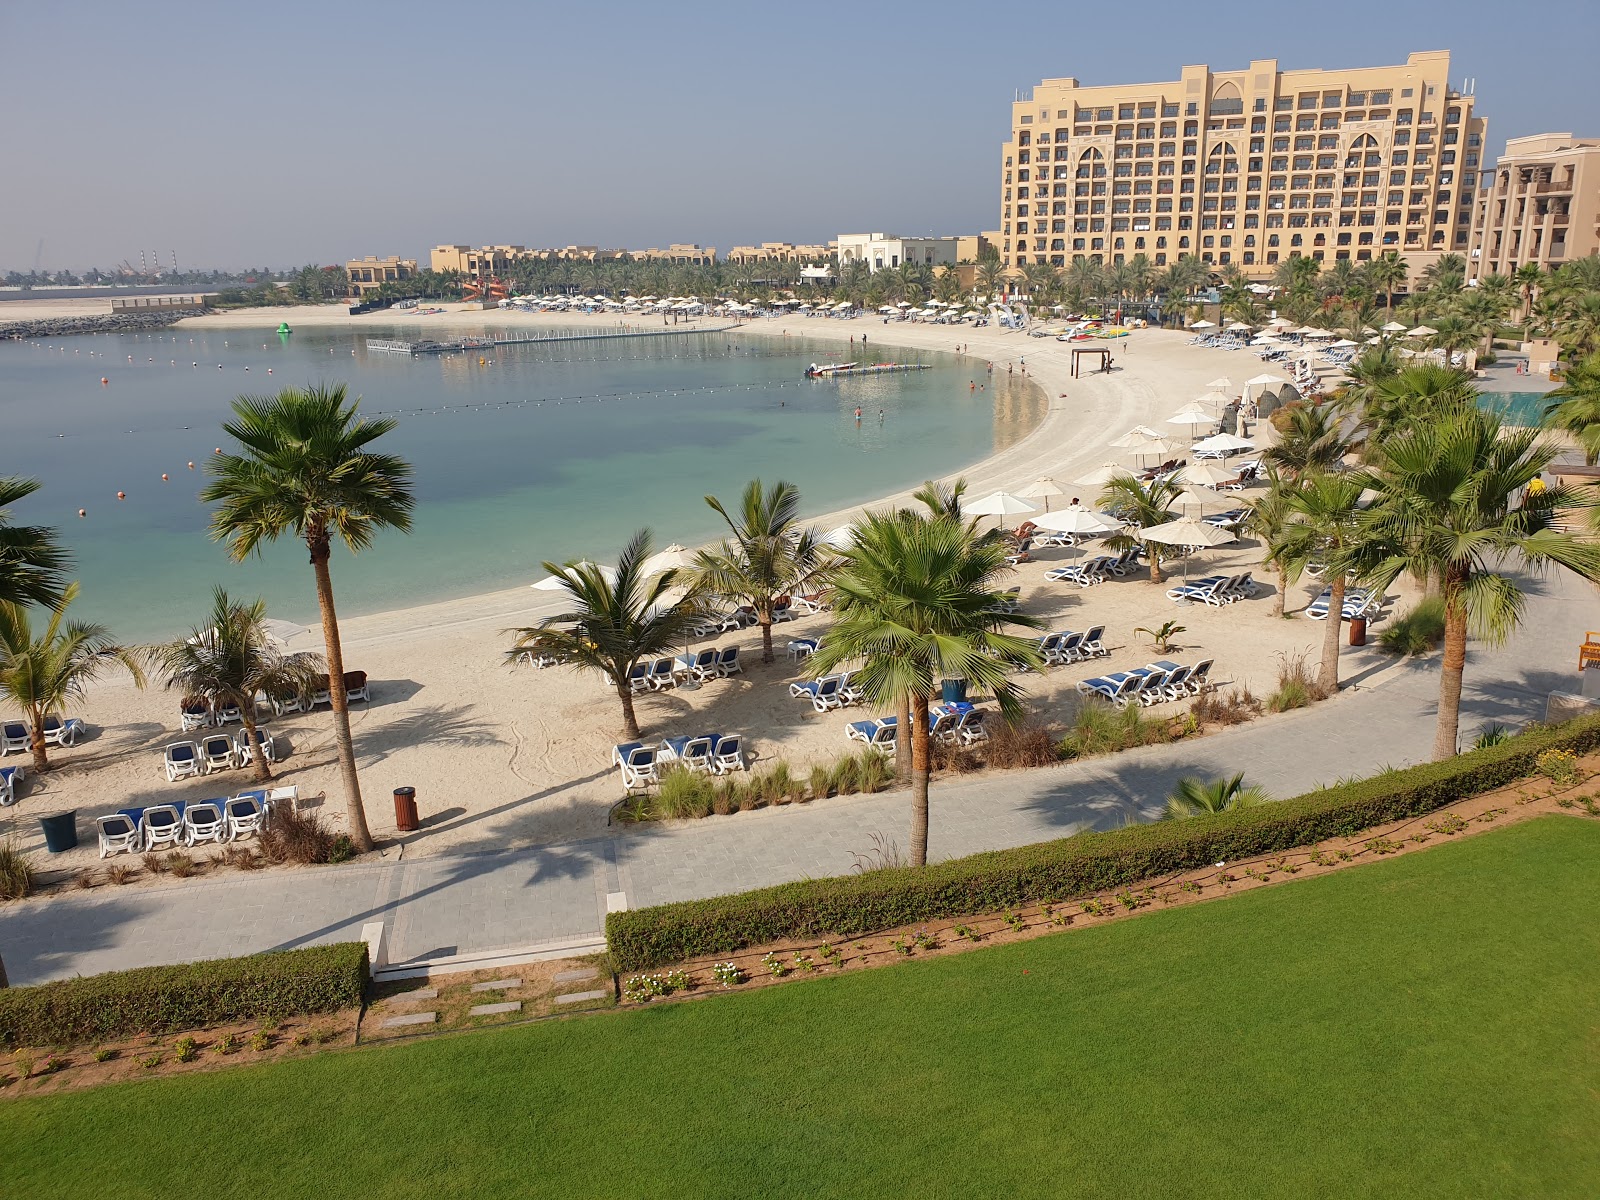 Photo of DoubleTree resort - popular place among relax connoisseurs